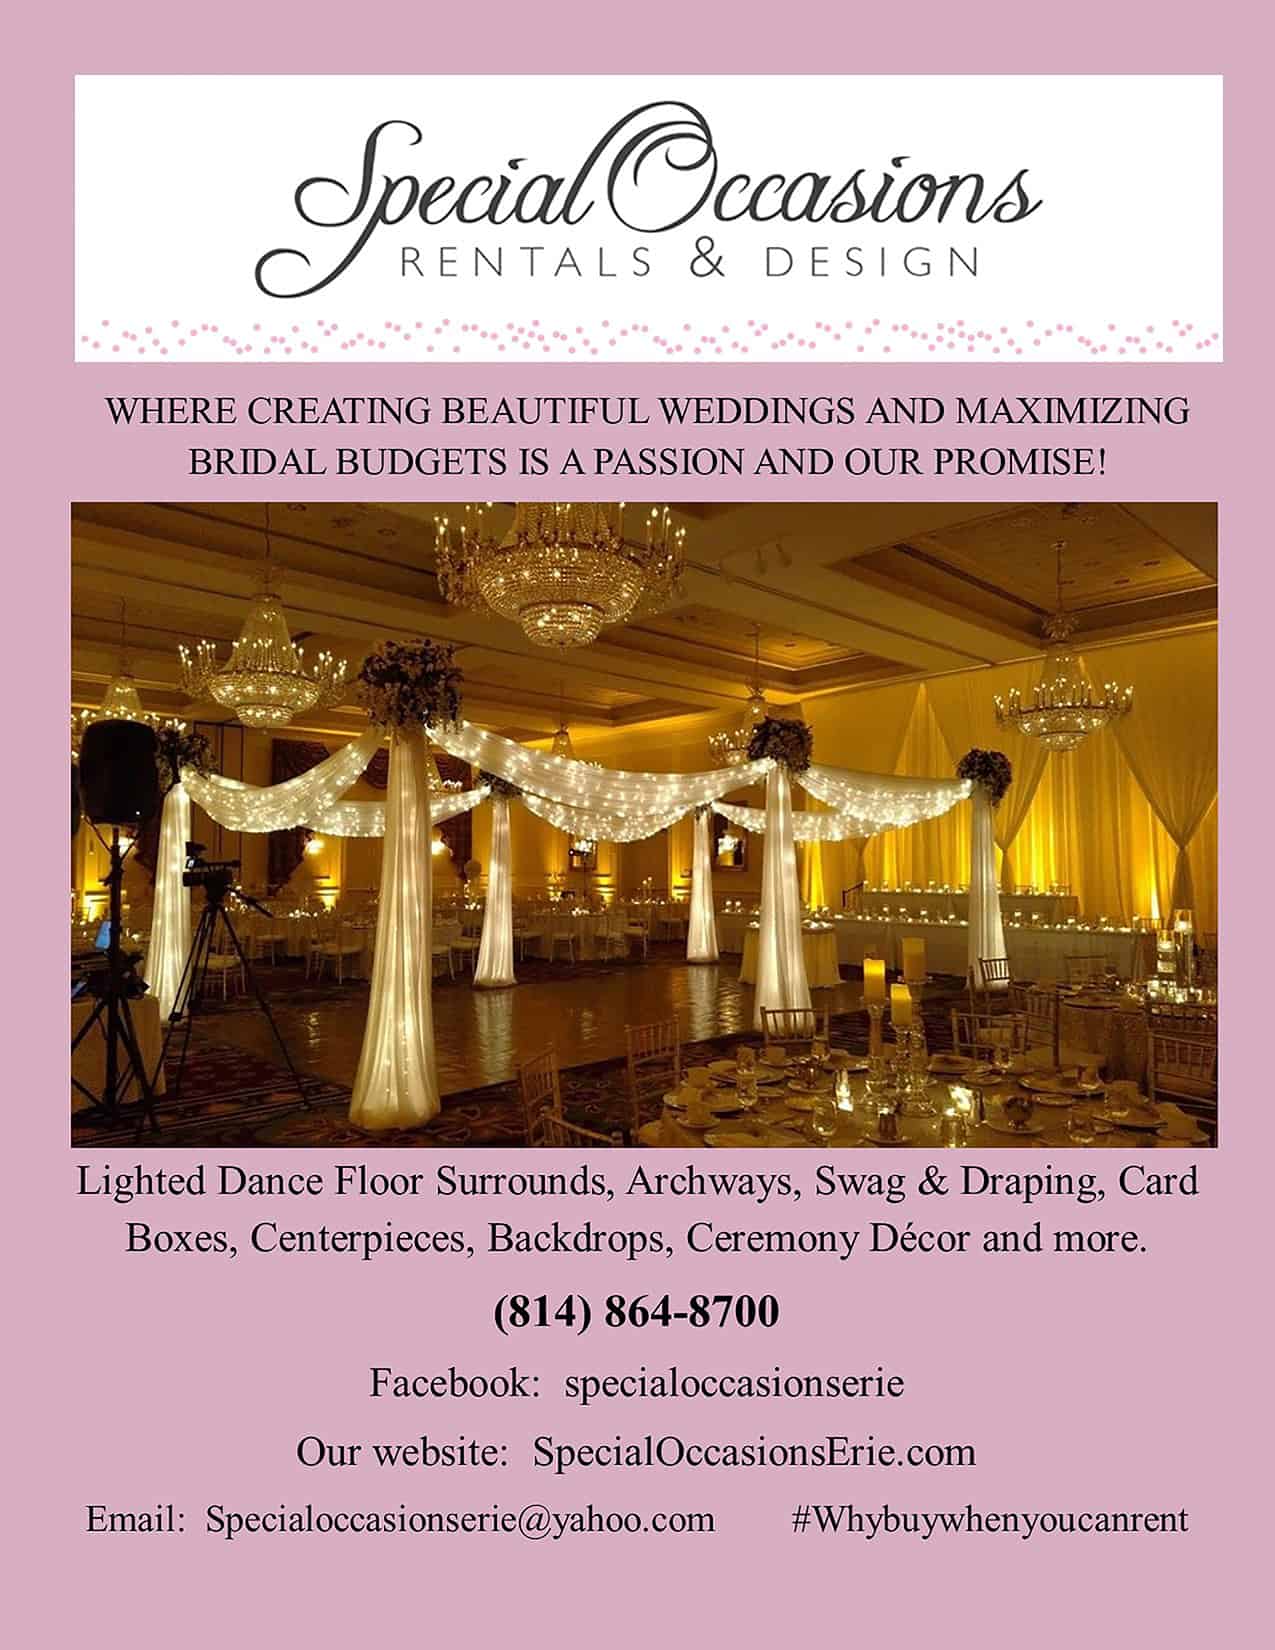 Special Occasions Resize